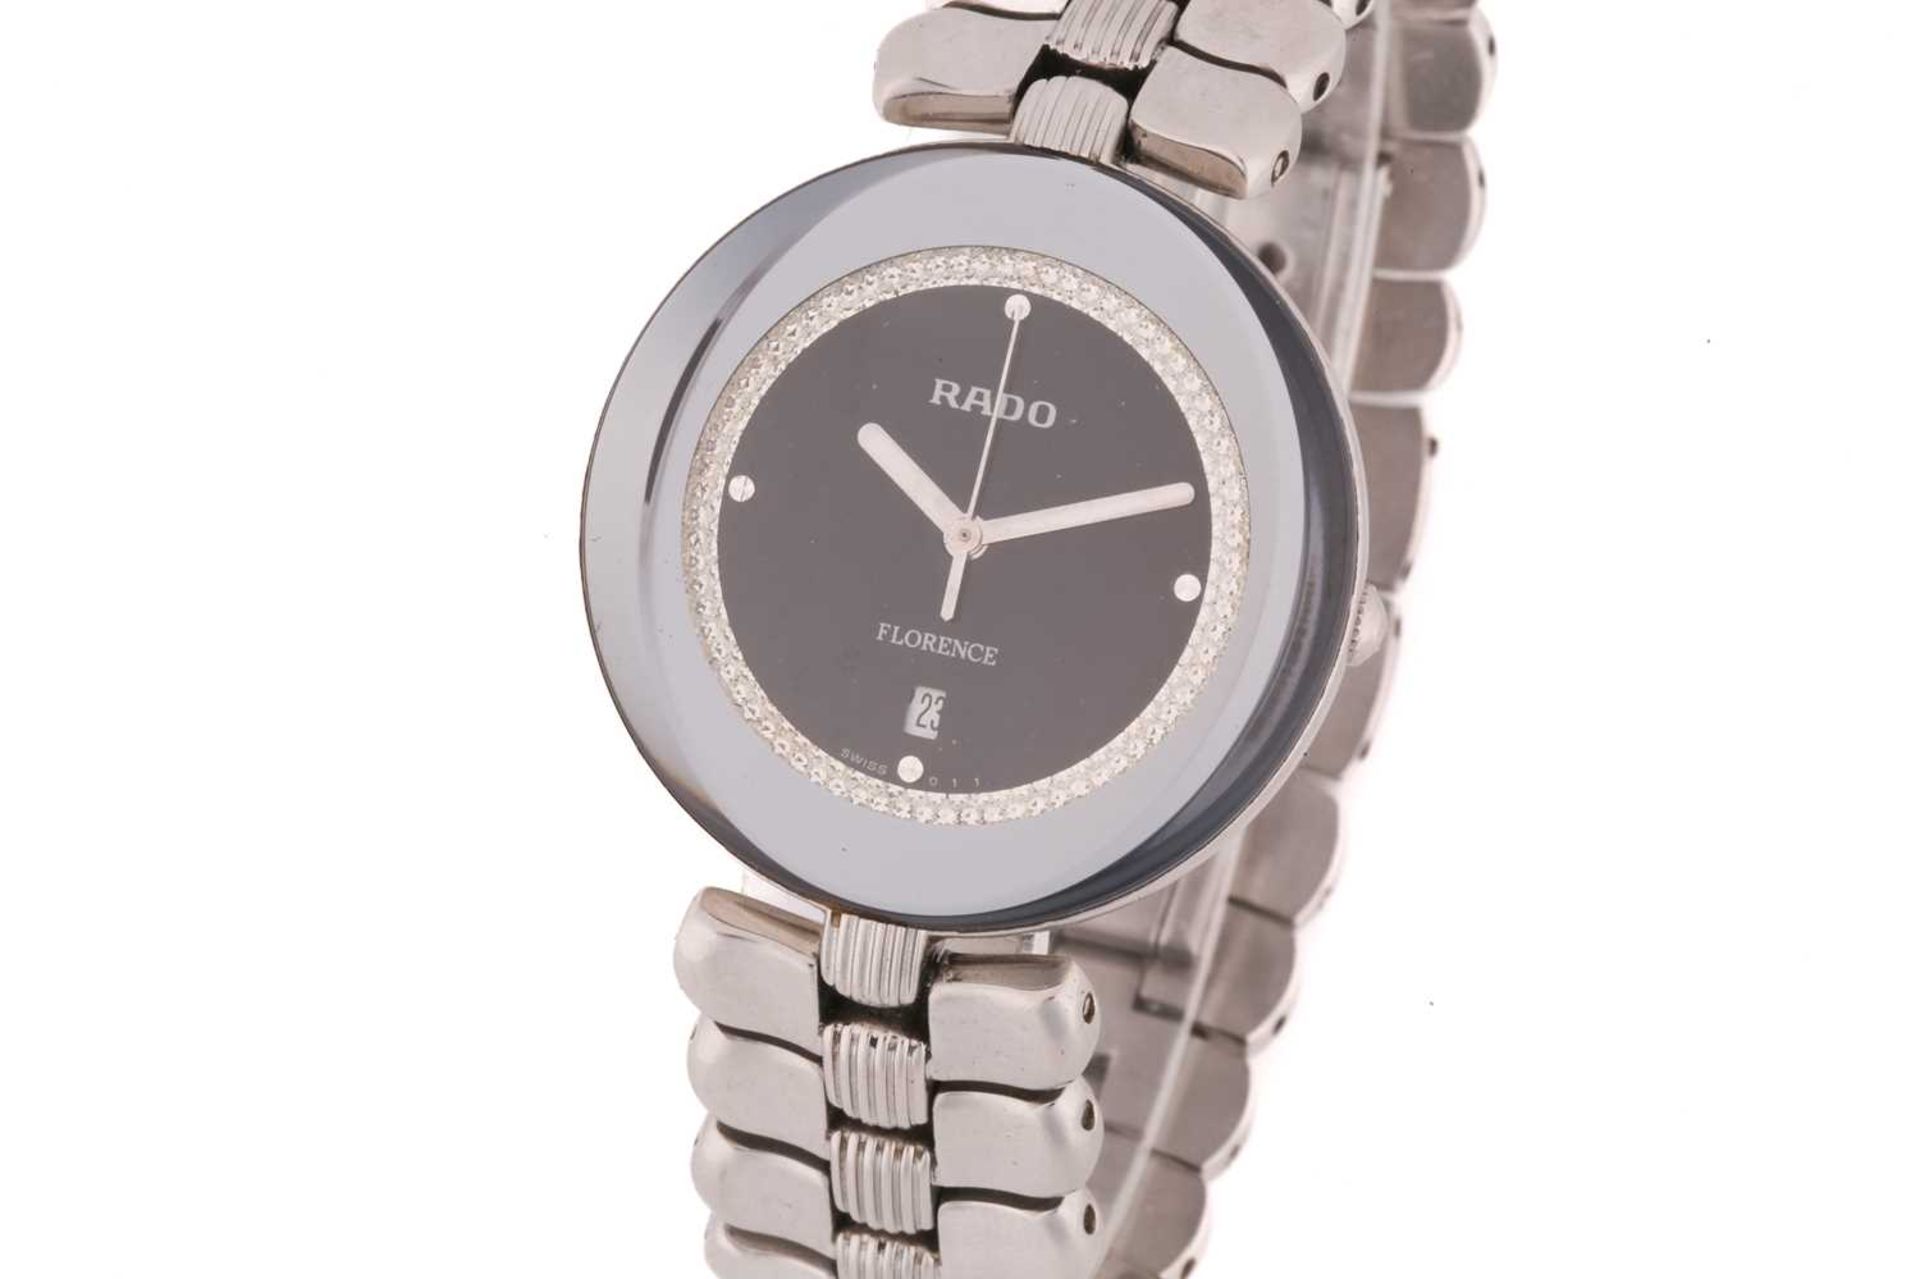 A Rado Florence lady's wrist watch, featuring a swiss made quartz movement in a steel case measuring - Image 2 of 8